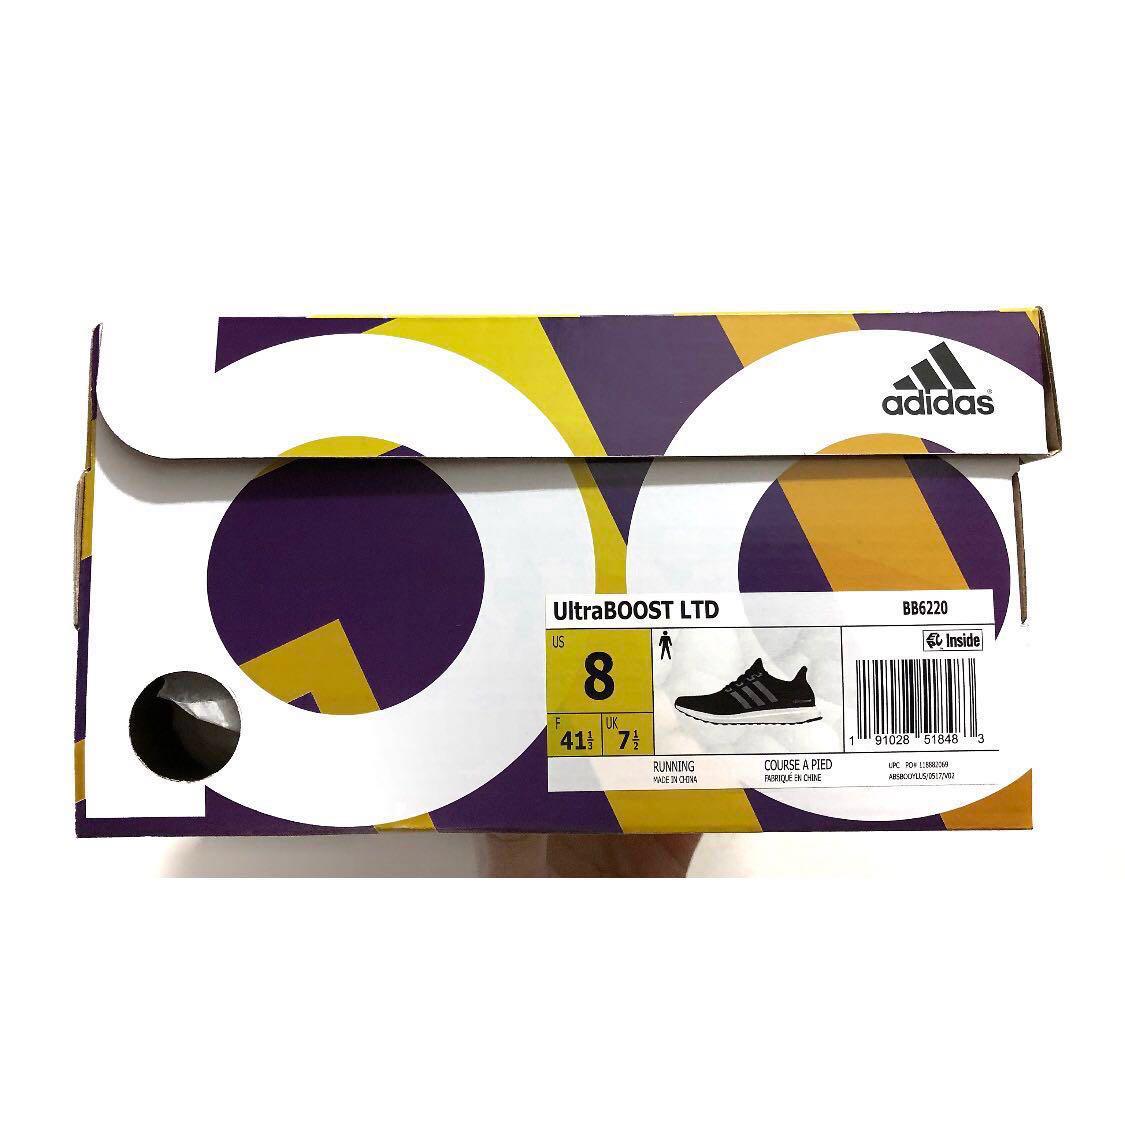 Adidas UltraBoost x Game of Thrones House Lannister eBay